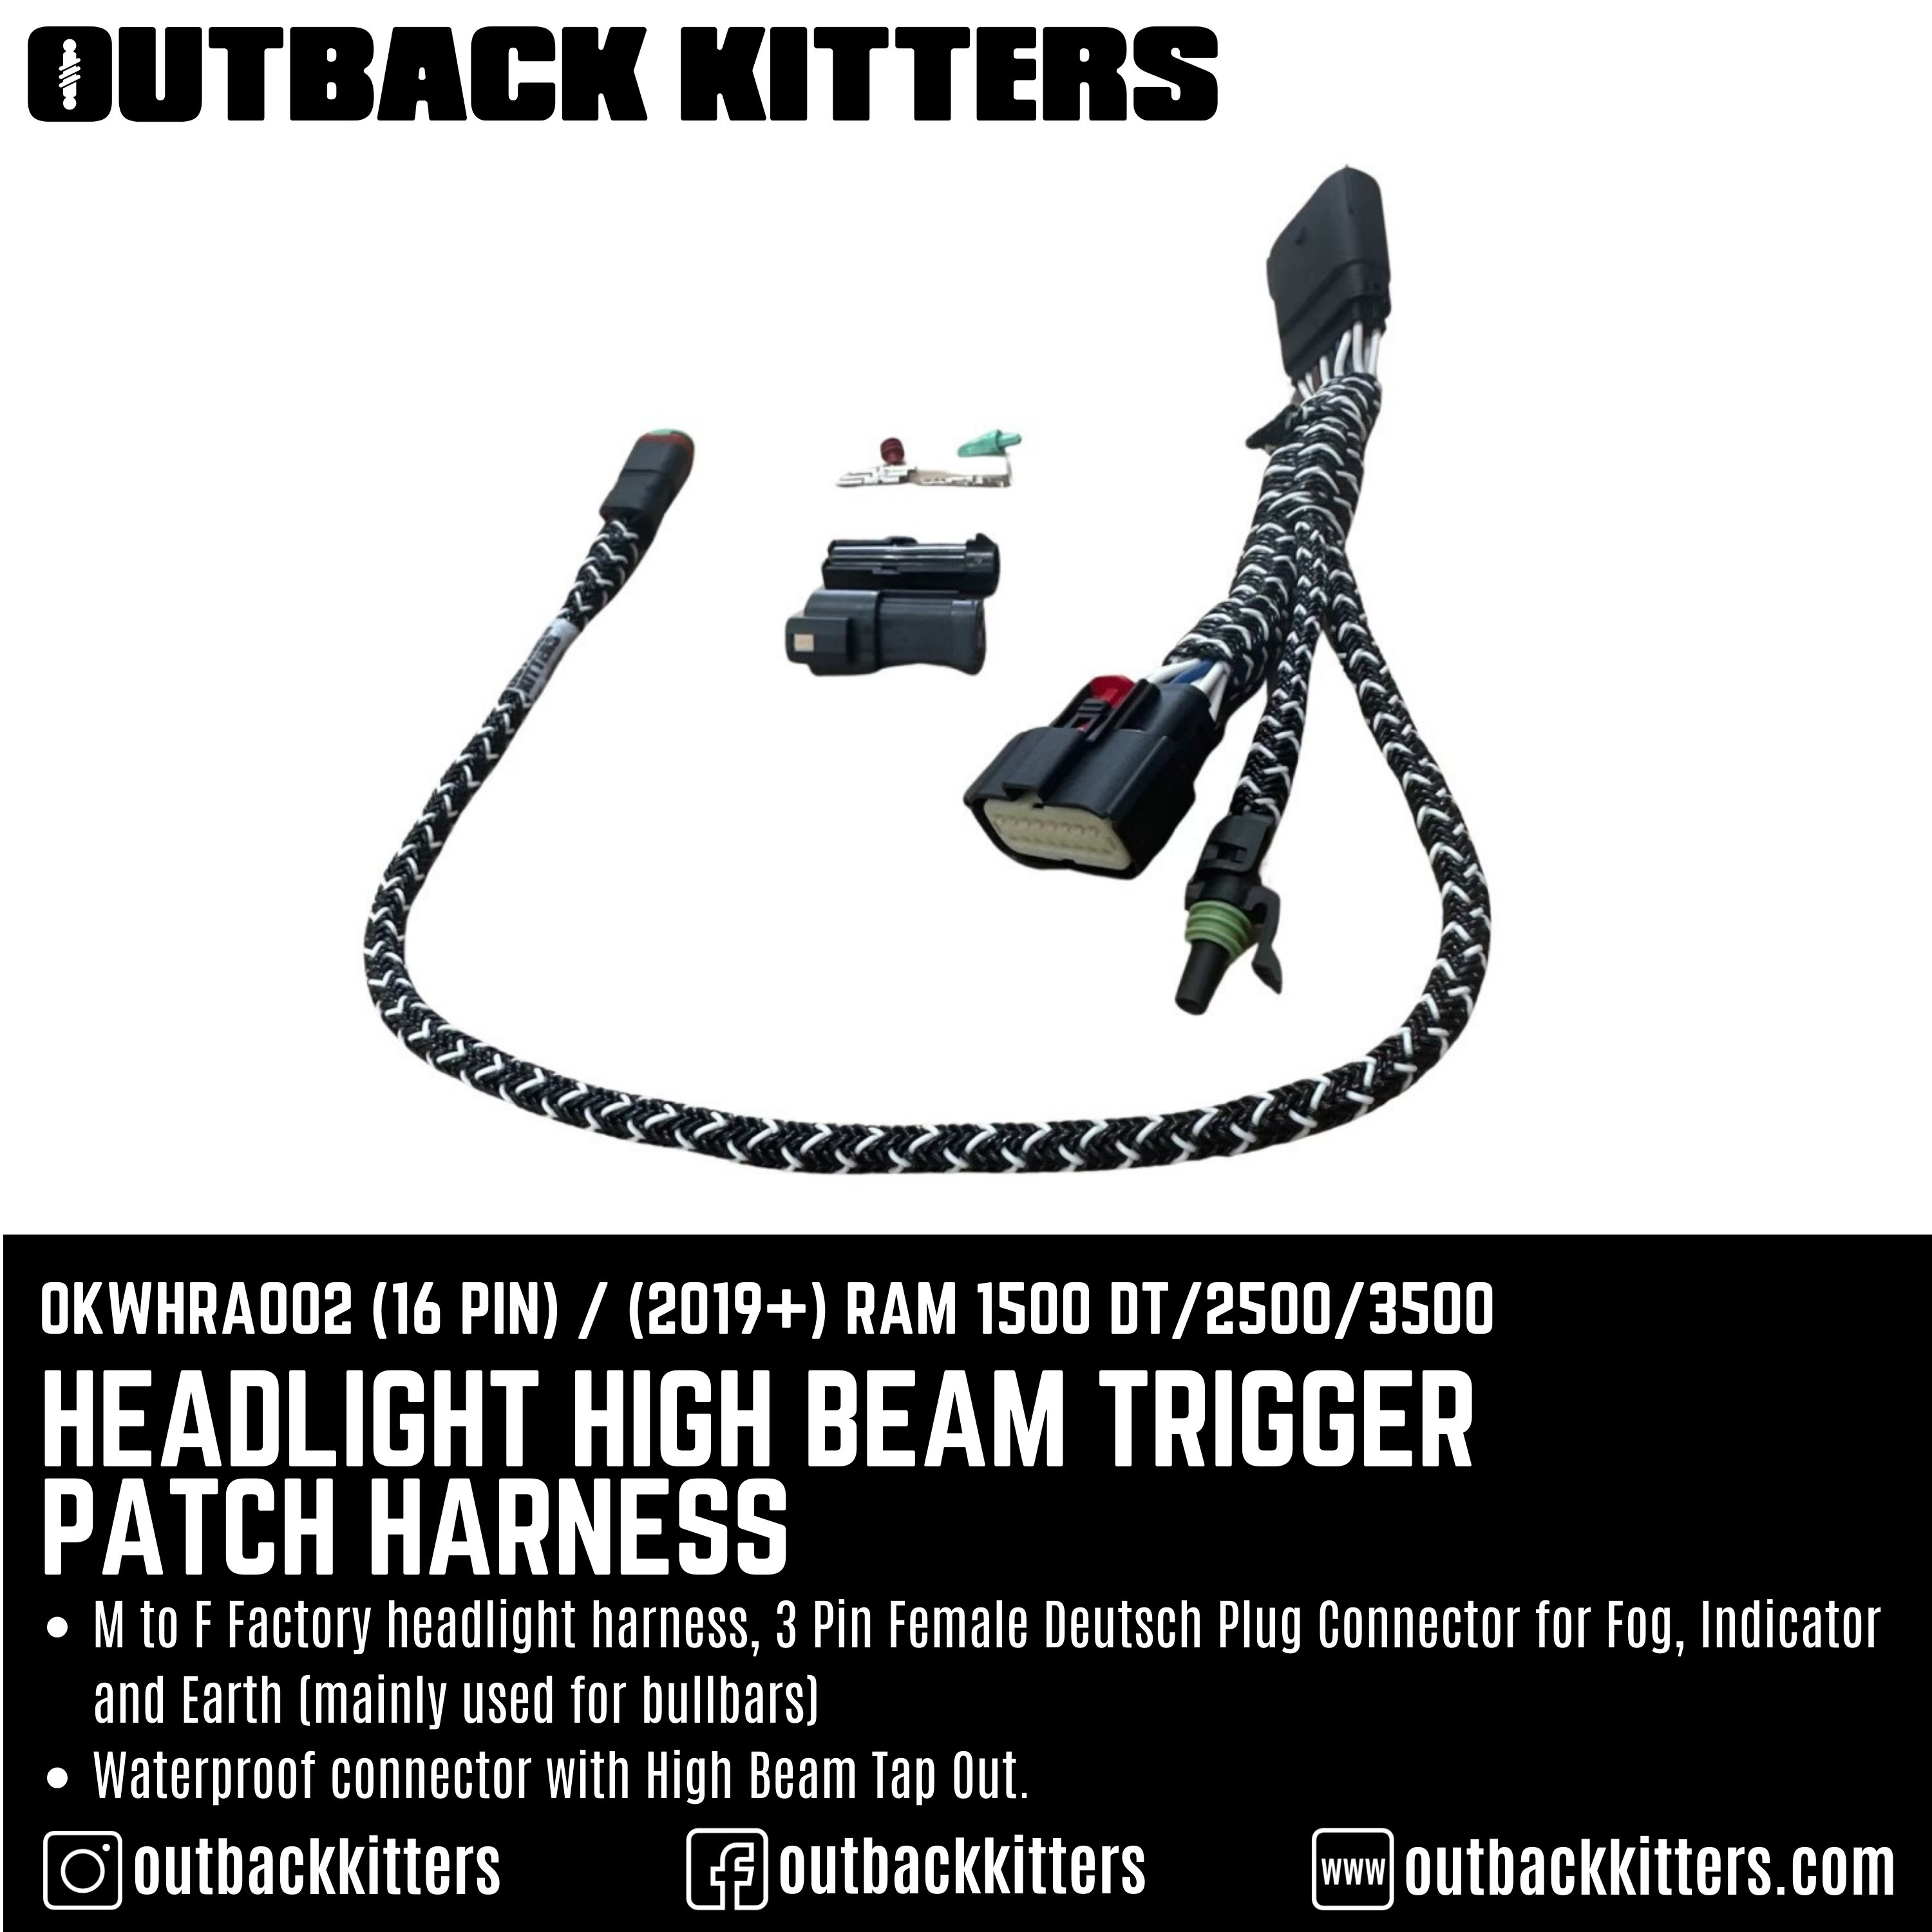 Headlight High Beam Trigger Patch Harness for Ram 1500 DT/2500 - Outback Kitters